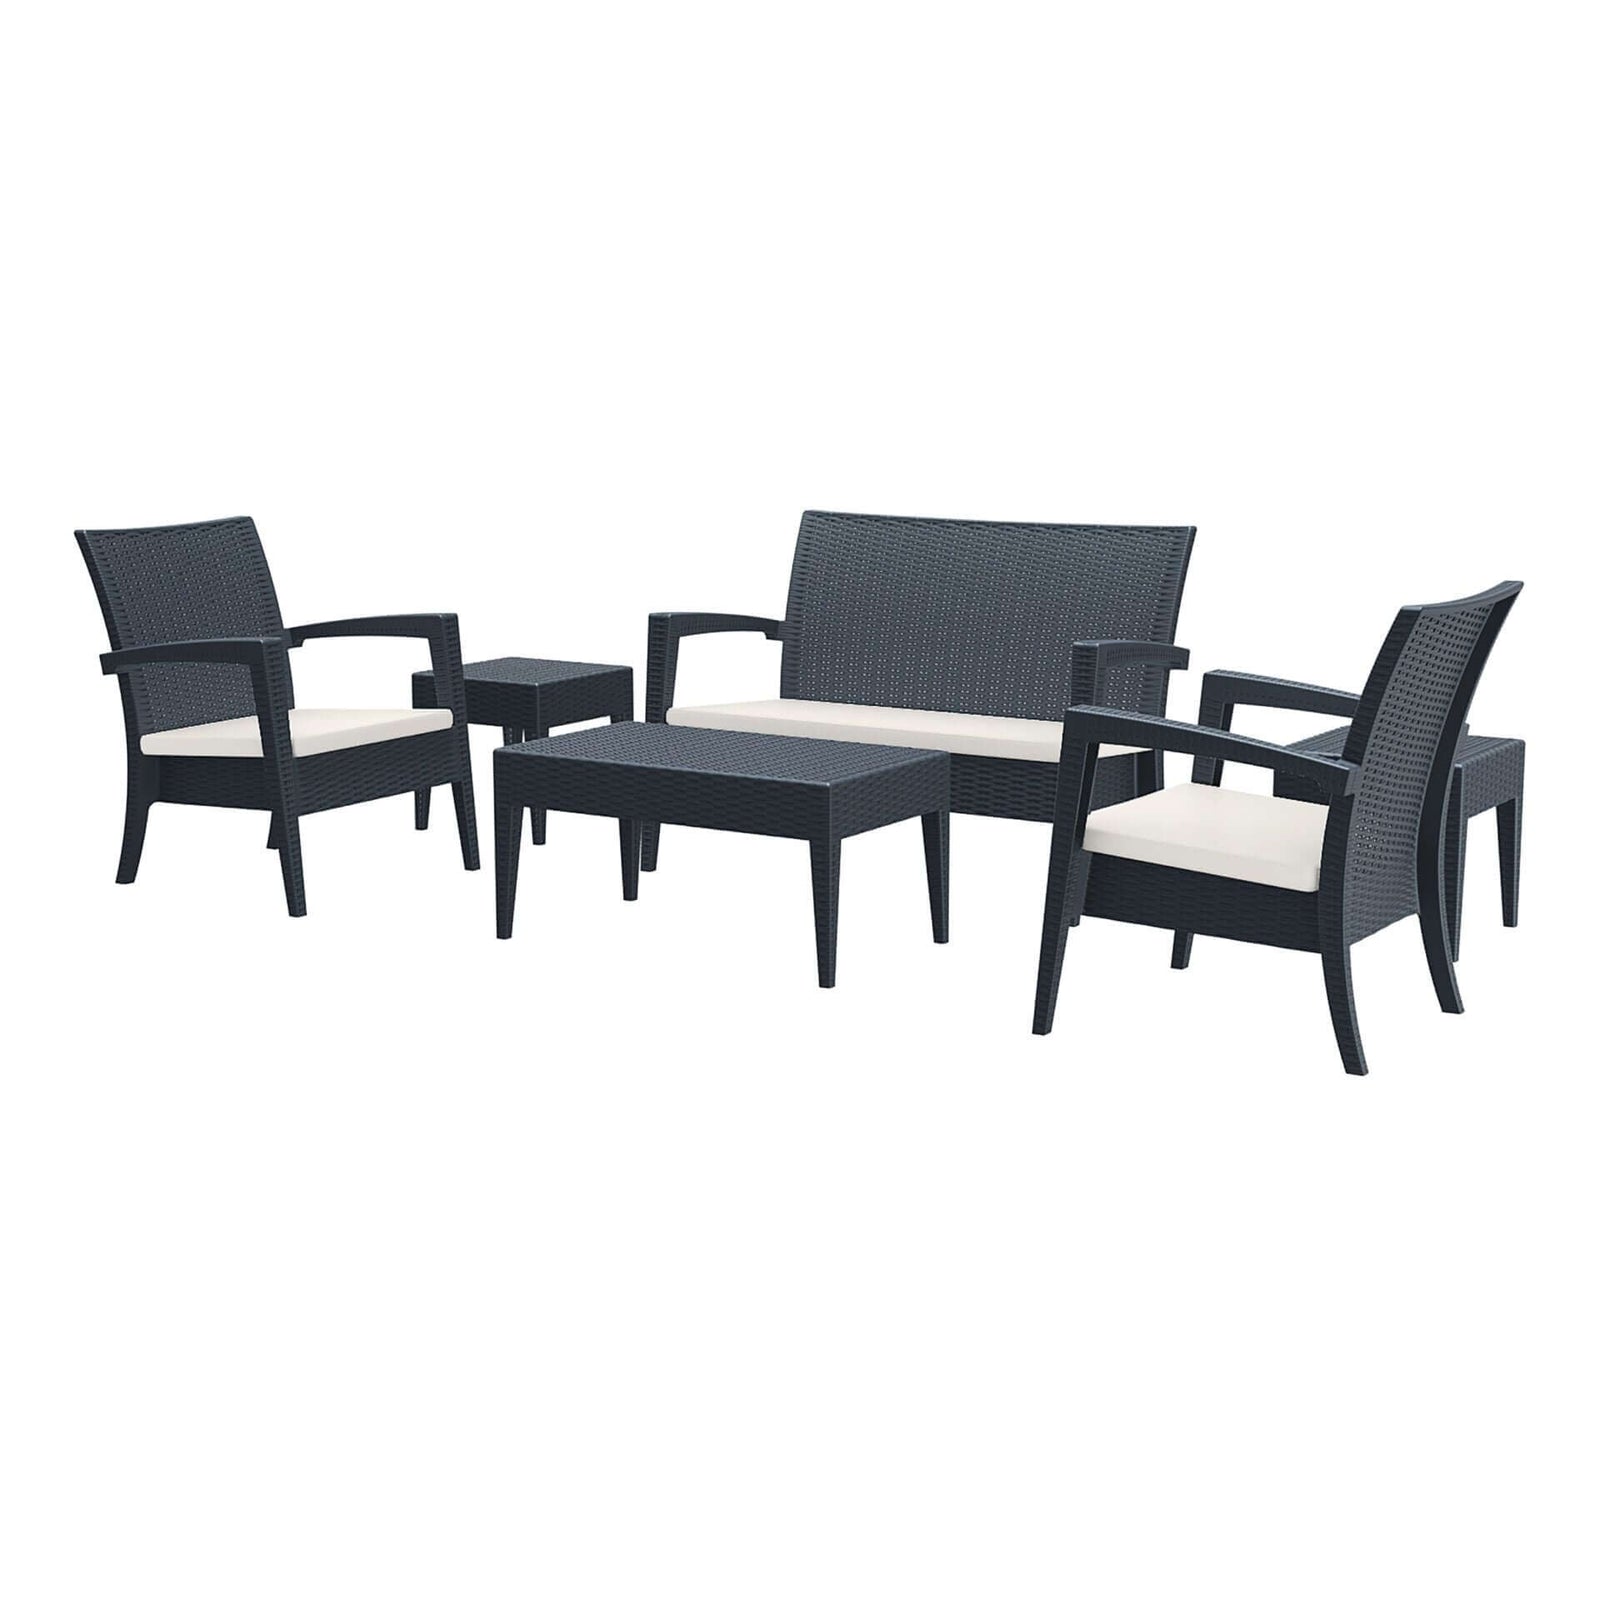 Tequila Lounge Set - Anthracite with cushions-Upinteriors